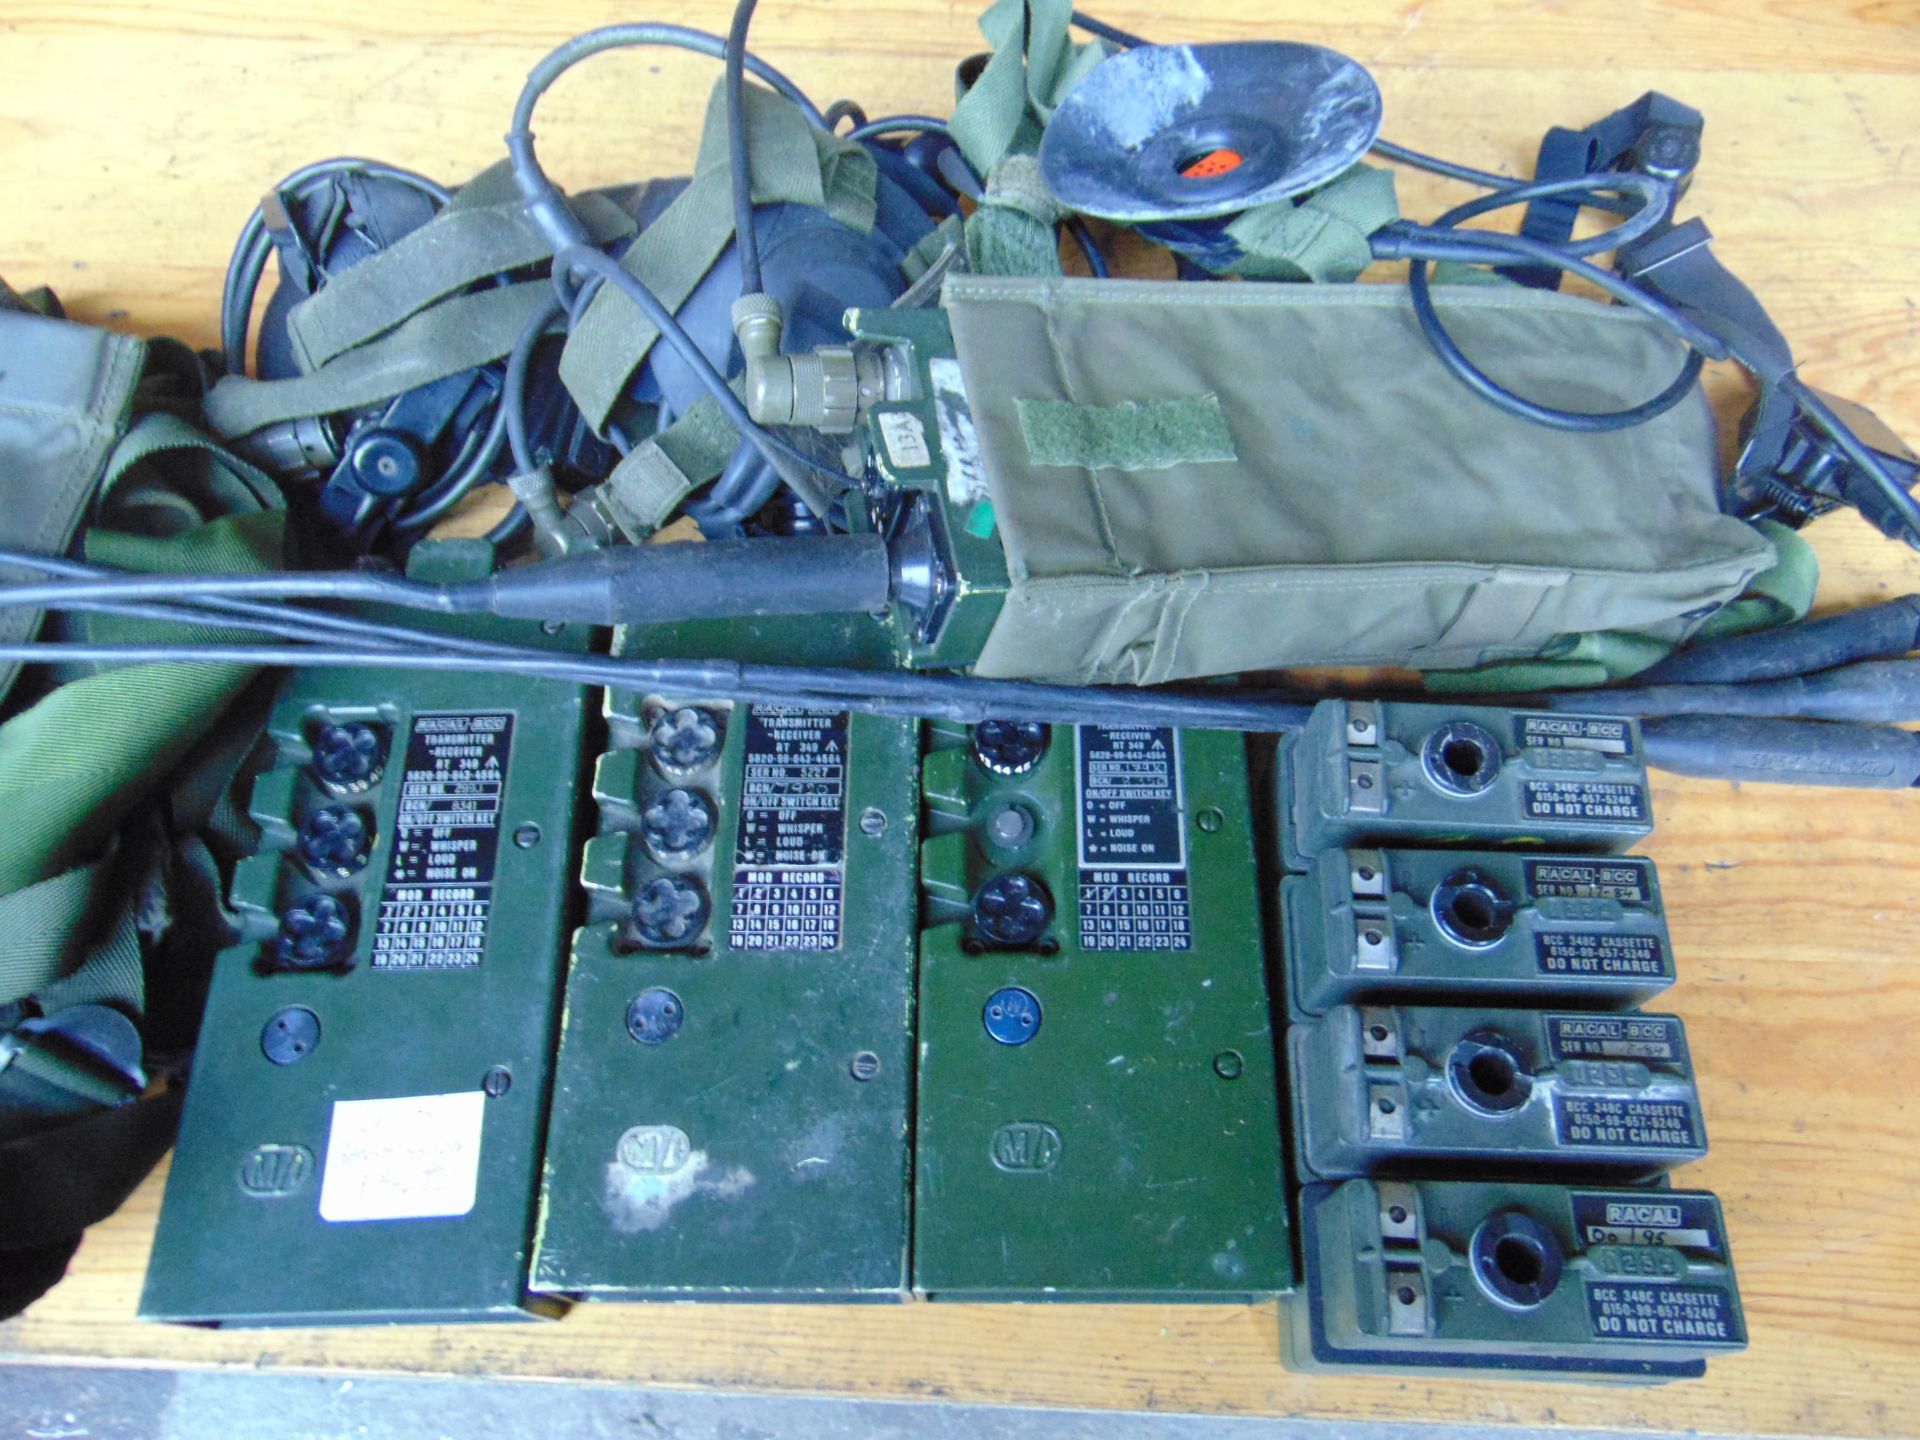 4 x UK / RT 349 Transmitter Receiver Complete as shown. - Image 3 of 5